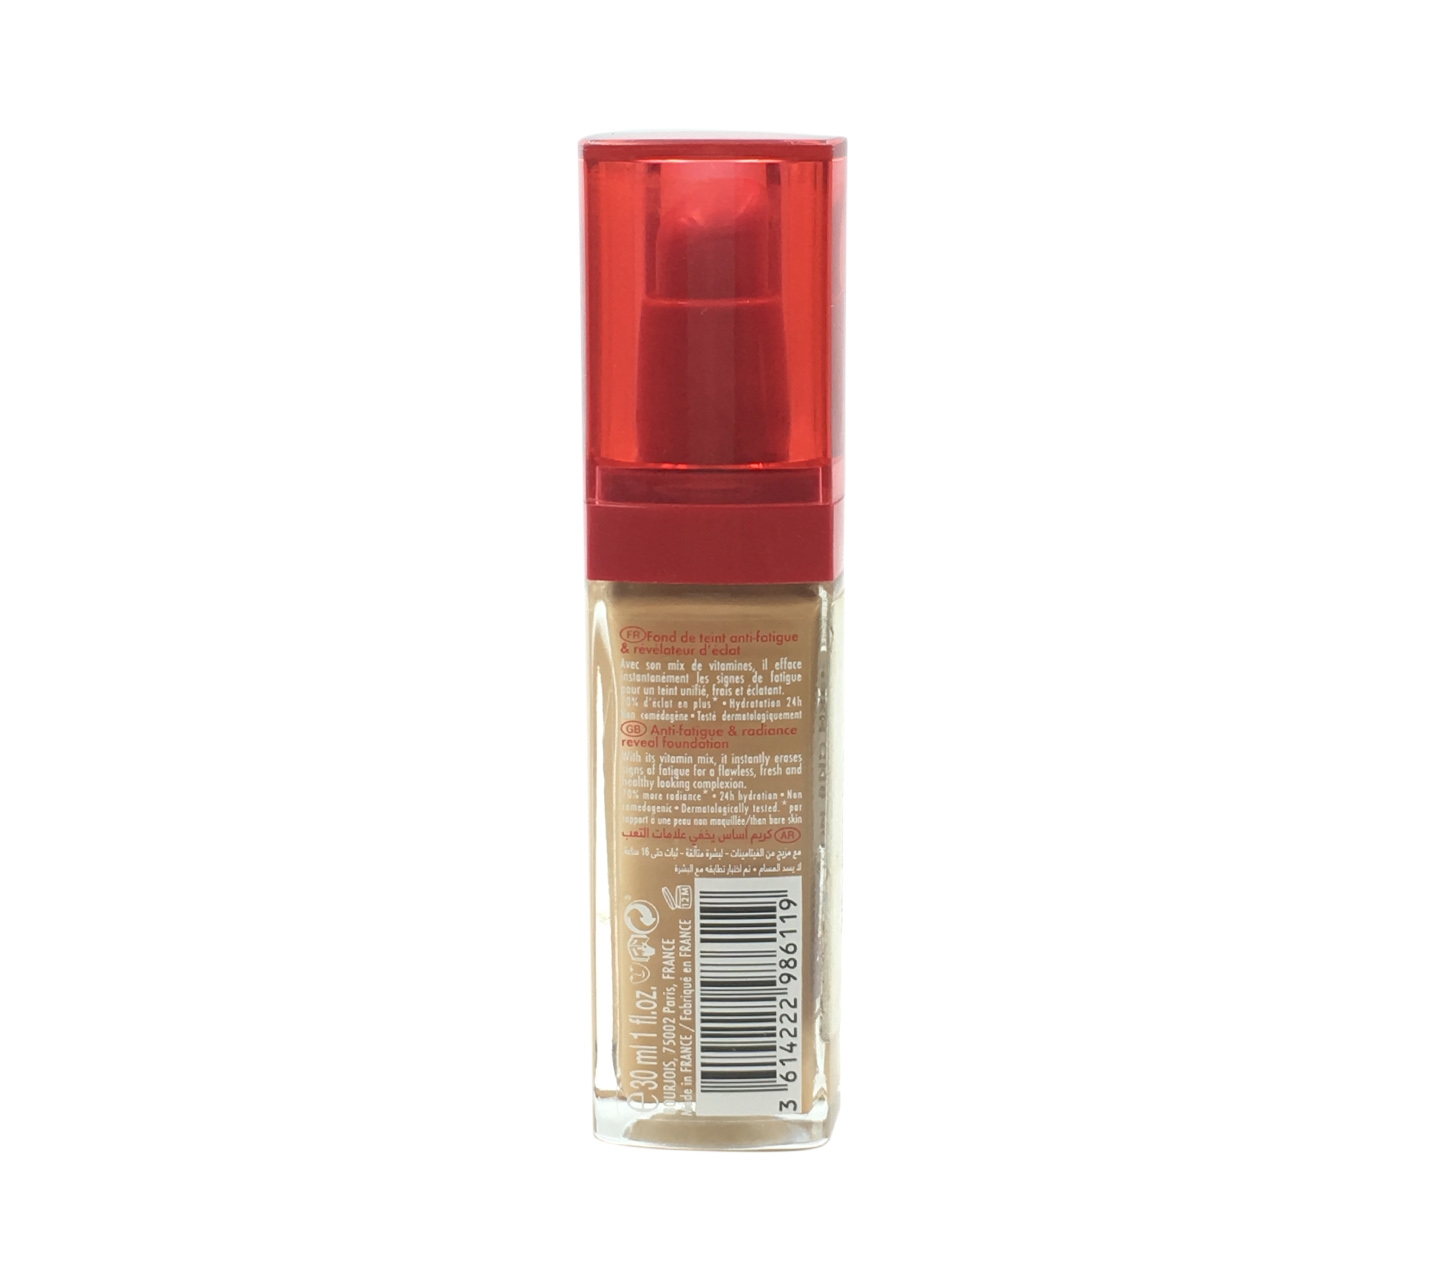 Bourjois healthy mix anti-fatigue foundation up to 16 hours